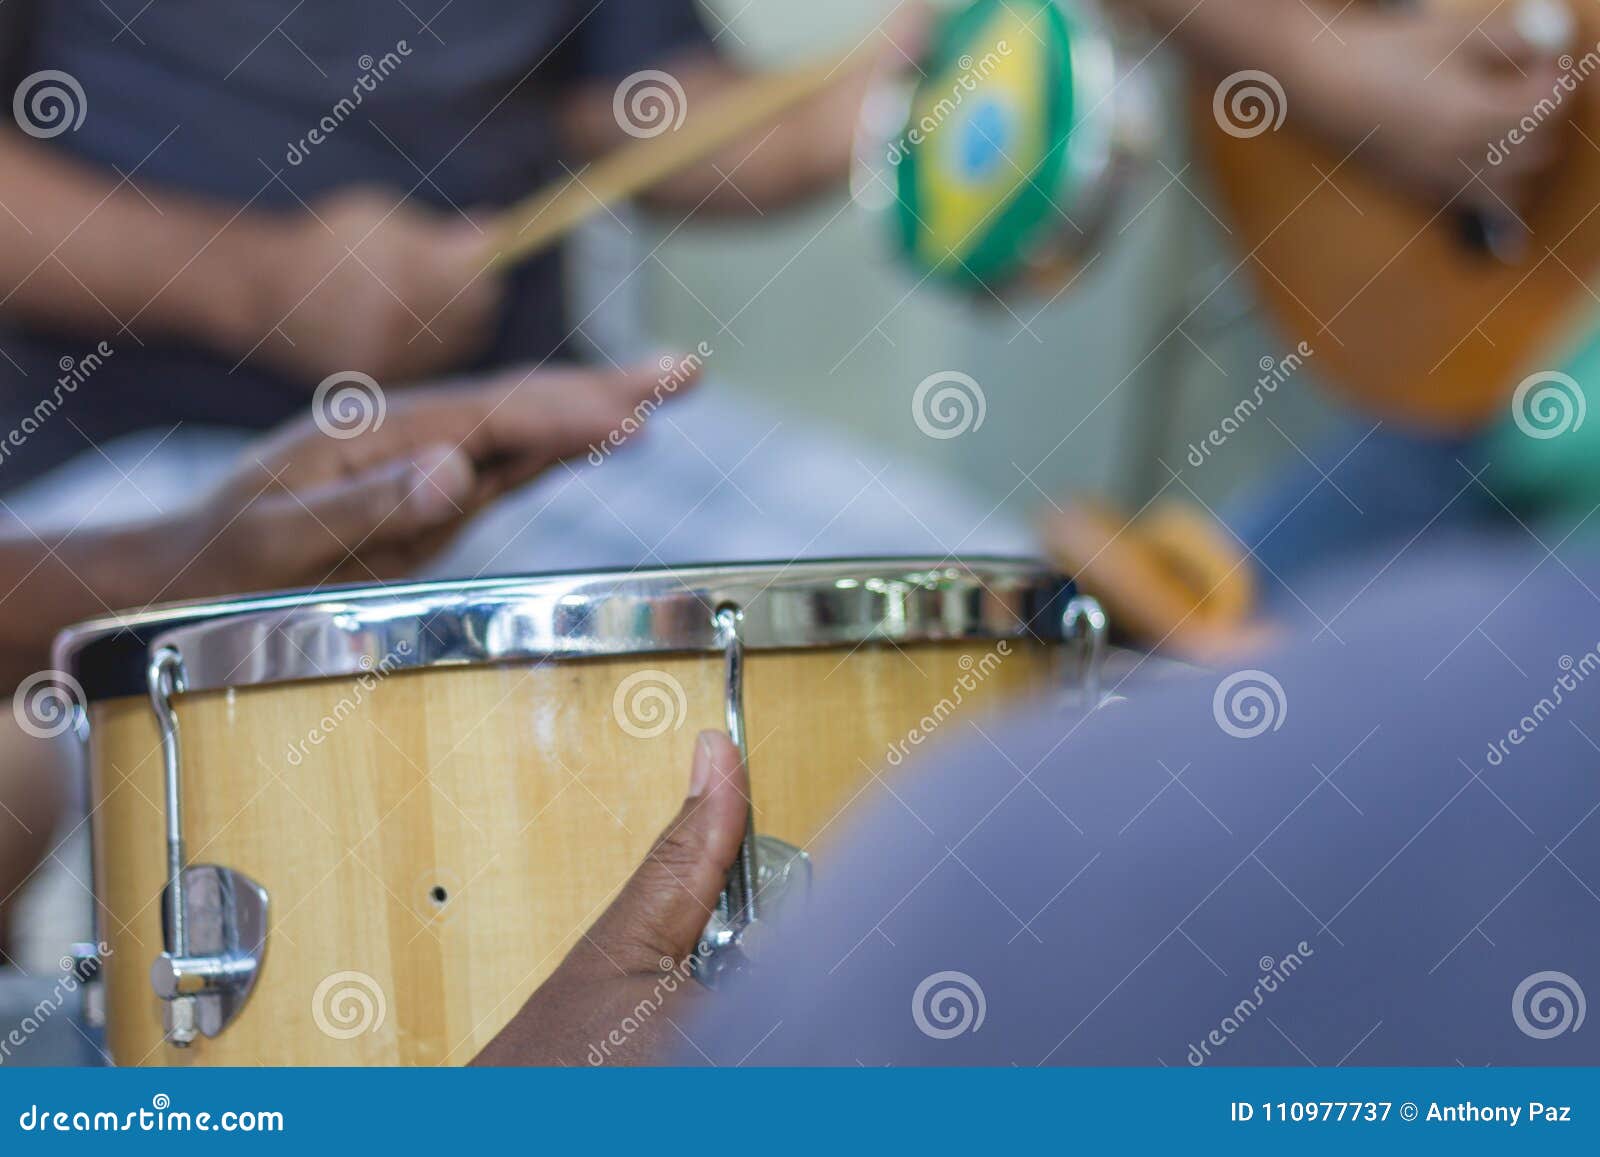 samba is part of carioca culture and one of the most traditional